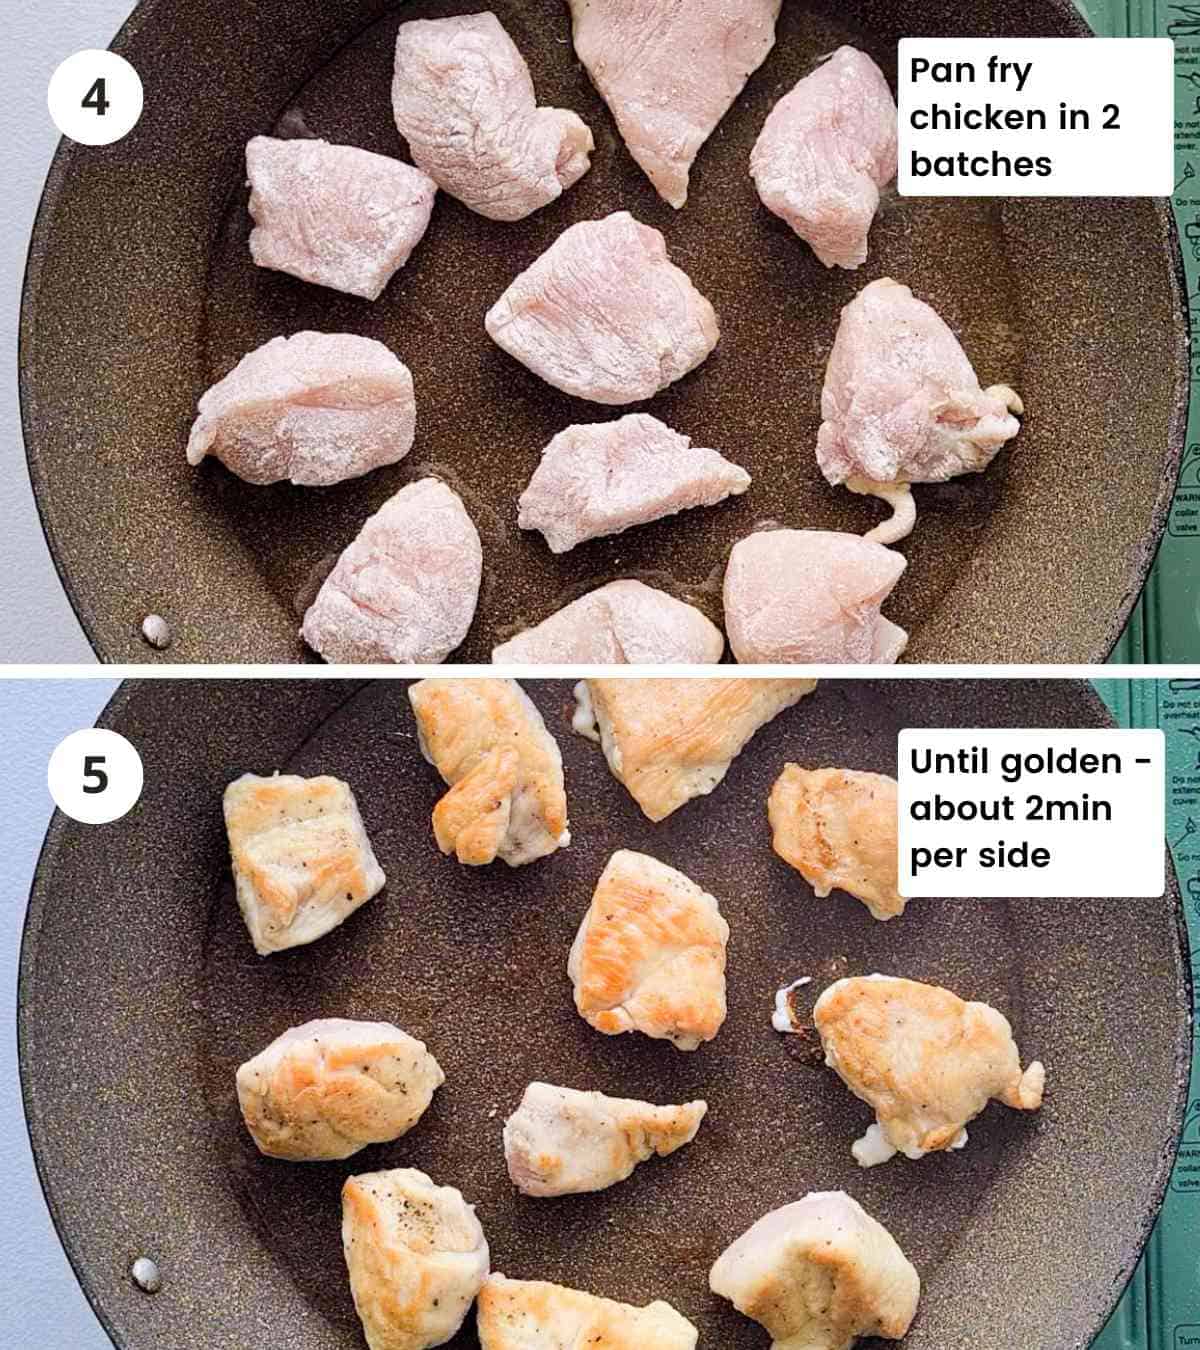 2 step how to collage of pan searing chicken until golden with captions